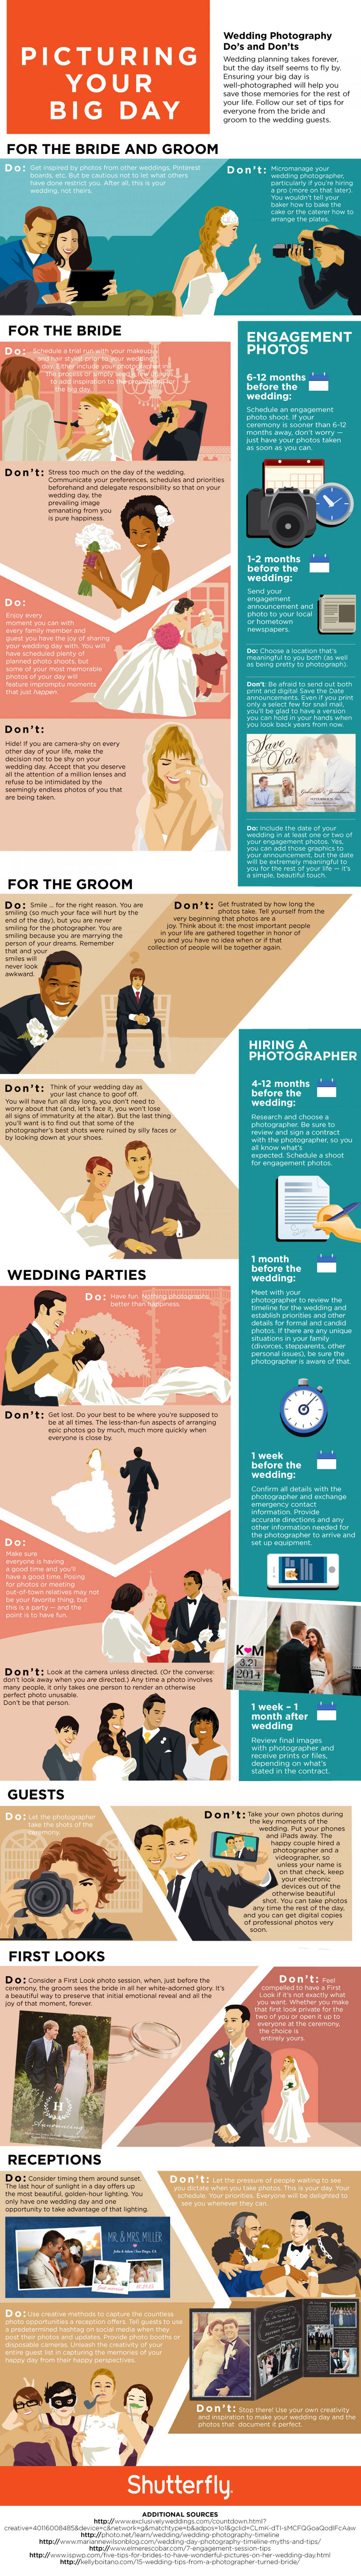 Wedding Photography Tips for the Bride and Groom Infographic